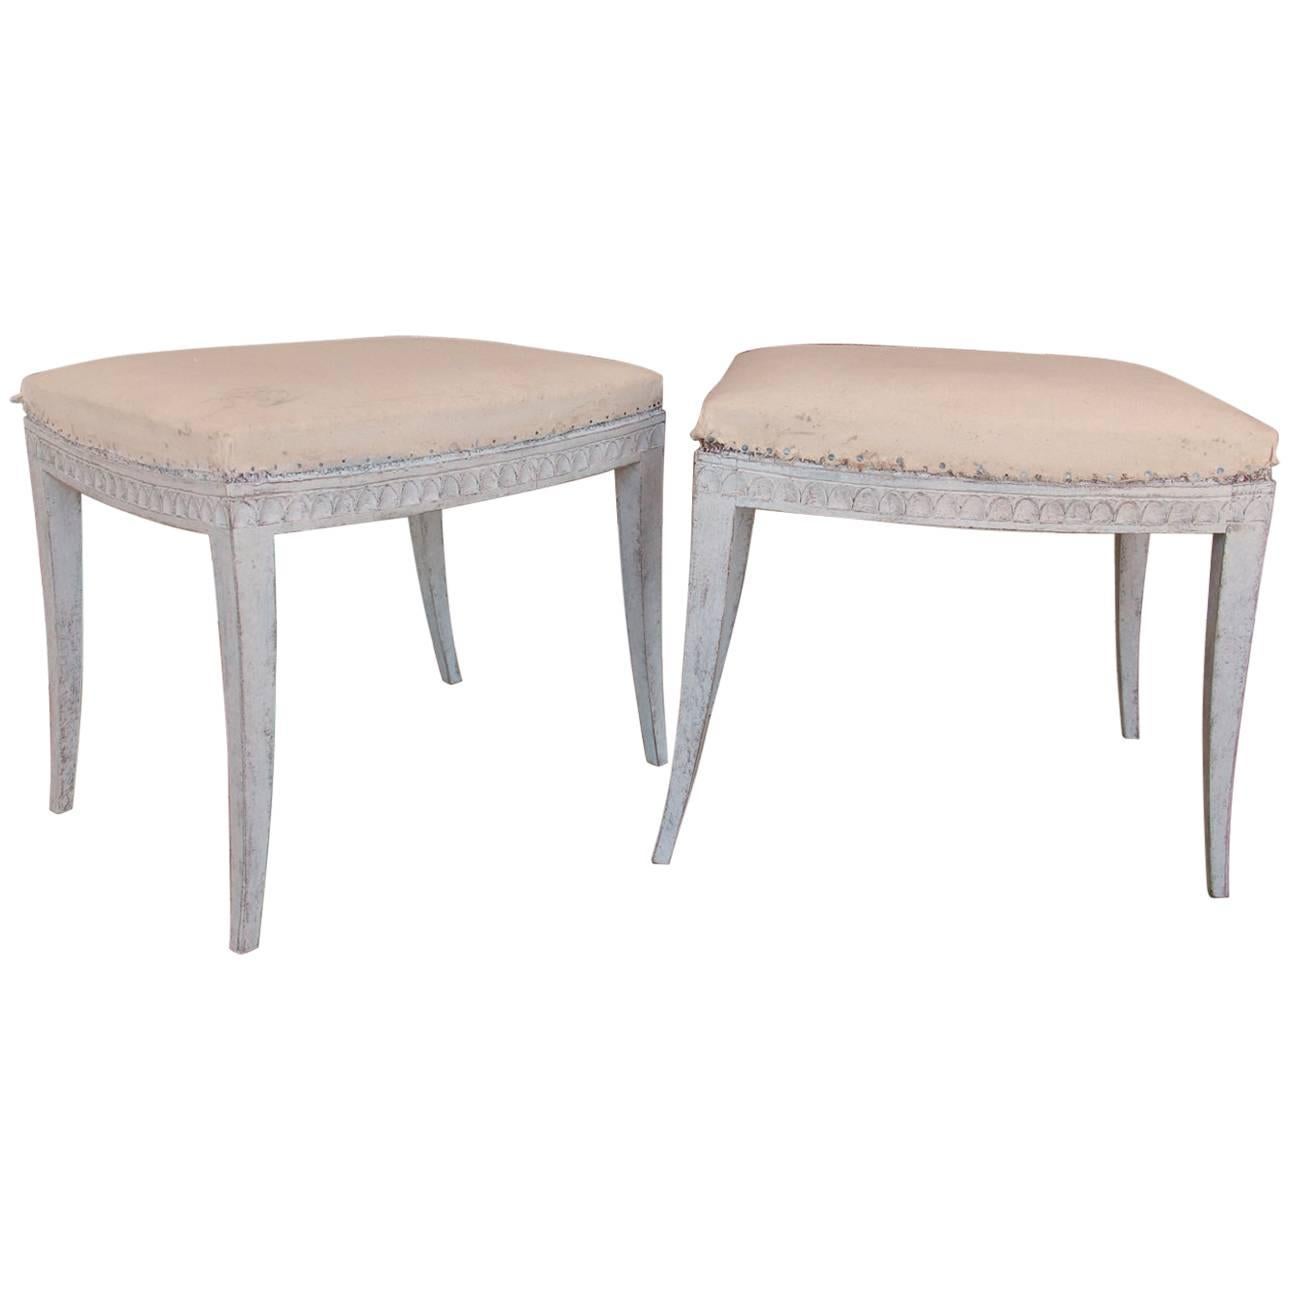 19th Century Pair of Swedish Gustavian Carved and Painted Stools with Saber Legs